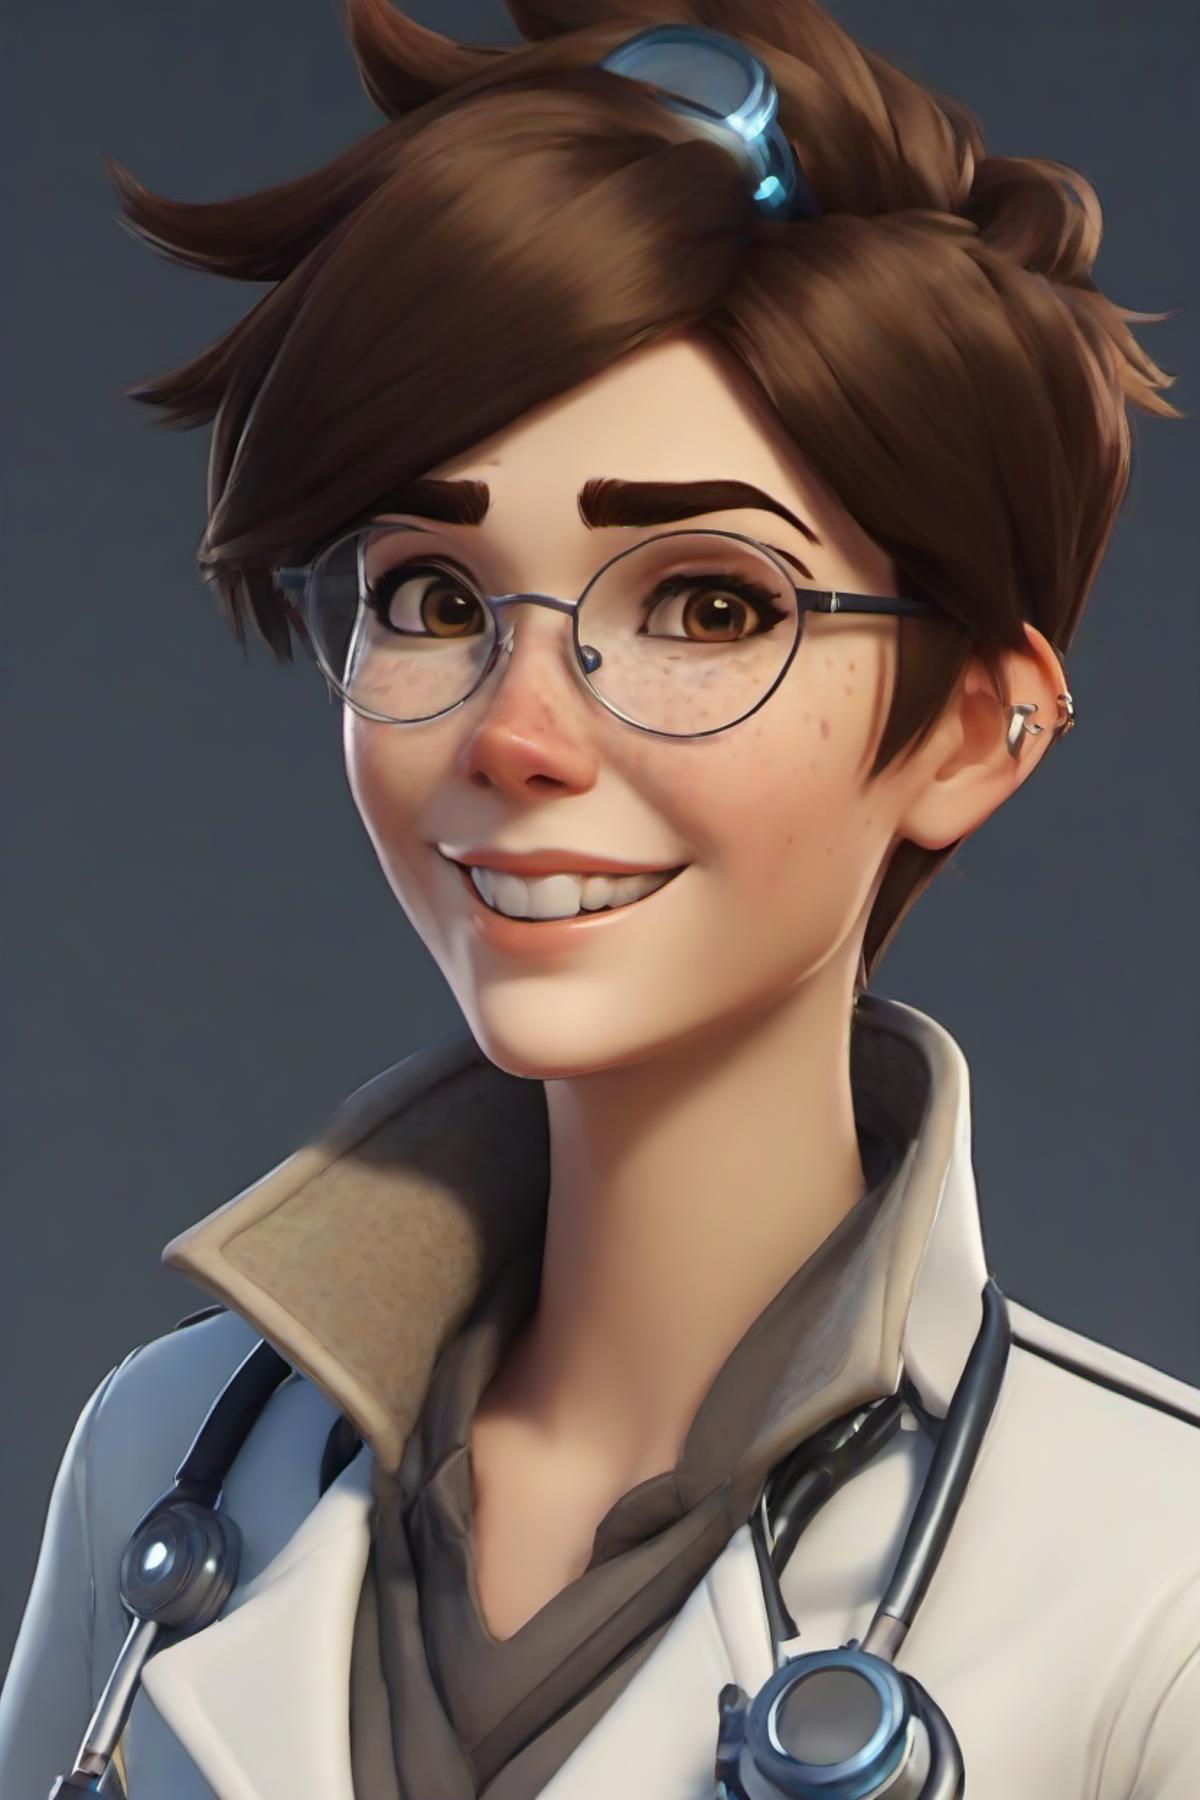 PE Tracer [Overwatch] [Character] image by Proompt_Engineer